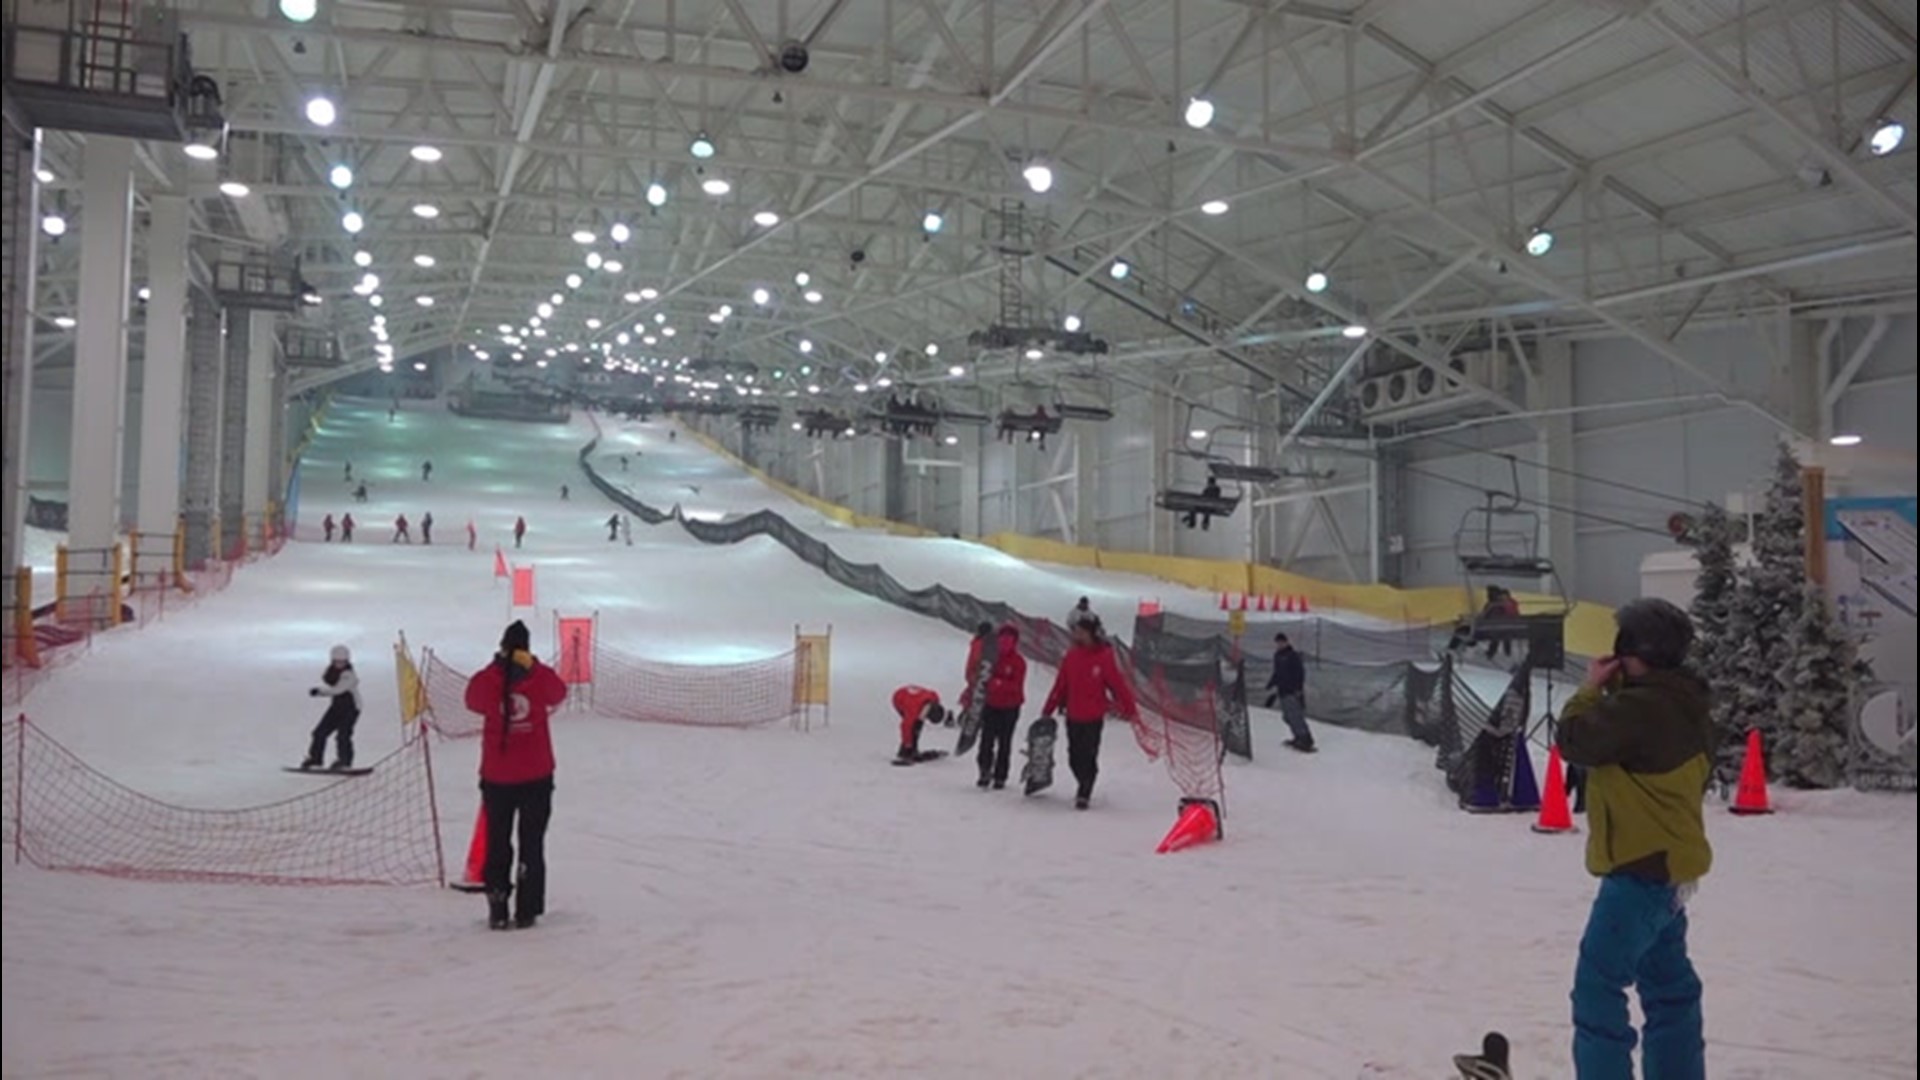 AccuWeather's Lincoln Riddle heads to East Rutherford, New Jersey, to try out indoor skiing at Big SNOW American Dream, the first indoor ski slope in North America.